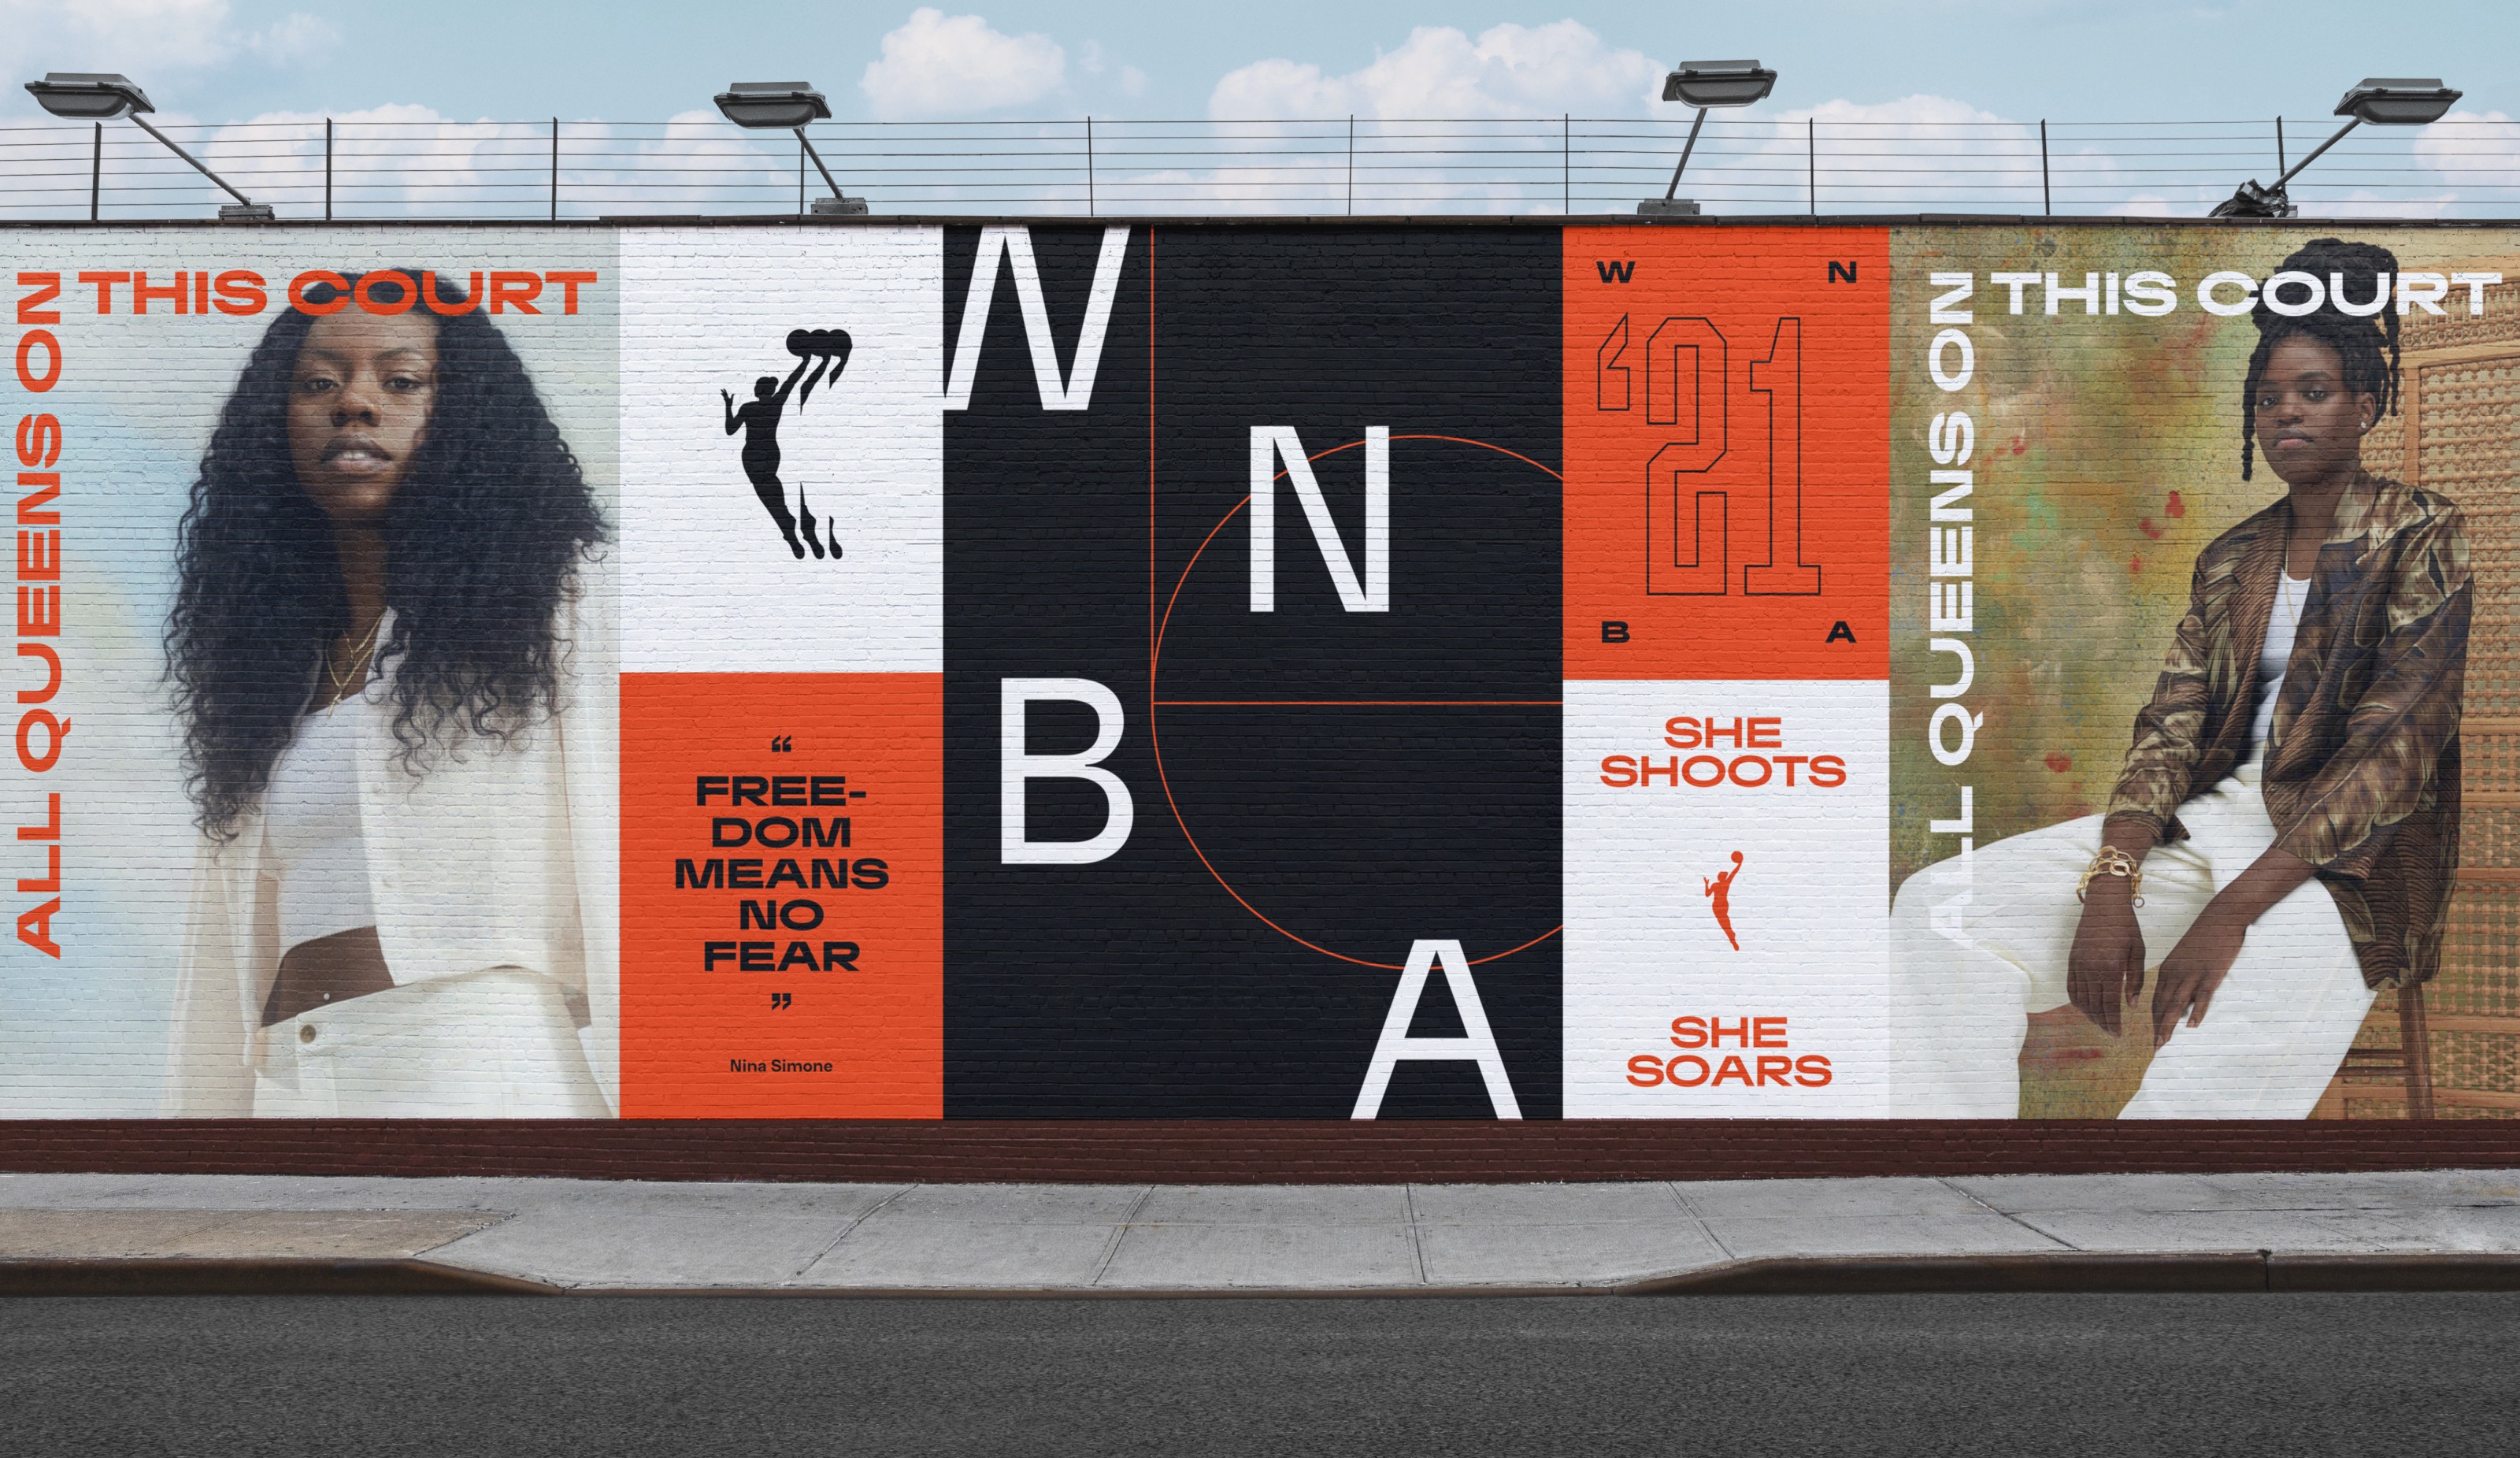 WNBA Outdoor mural: All queens on this court; “freedom means no fear”; she shoots she soars